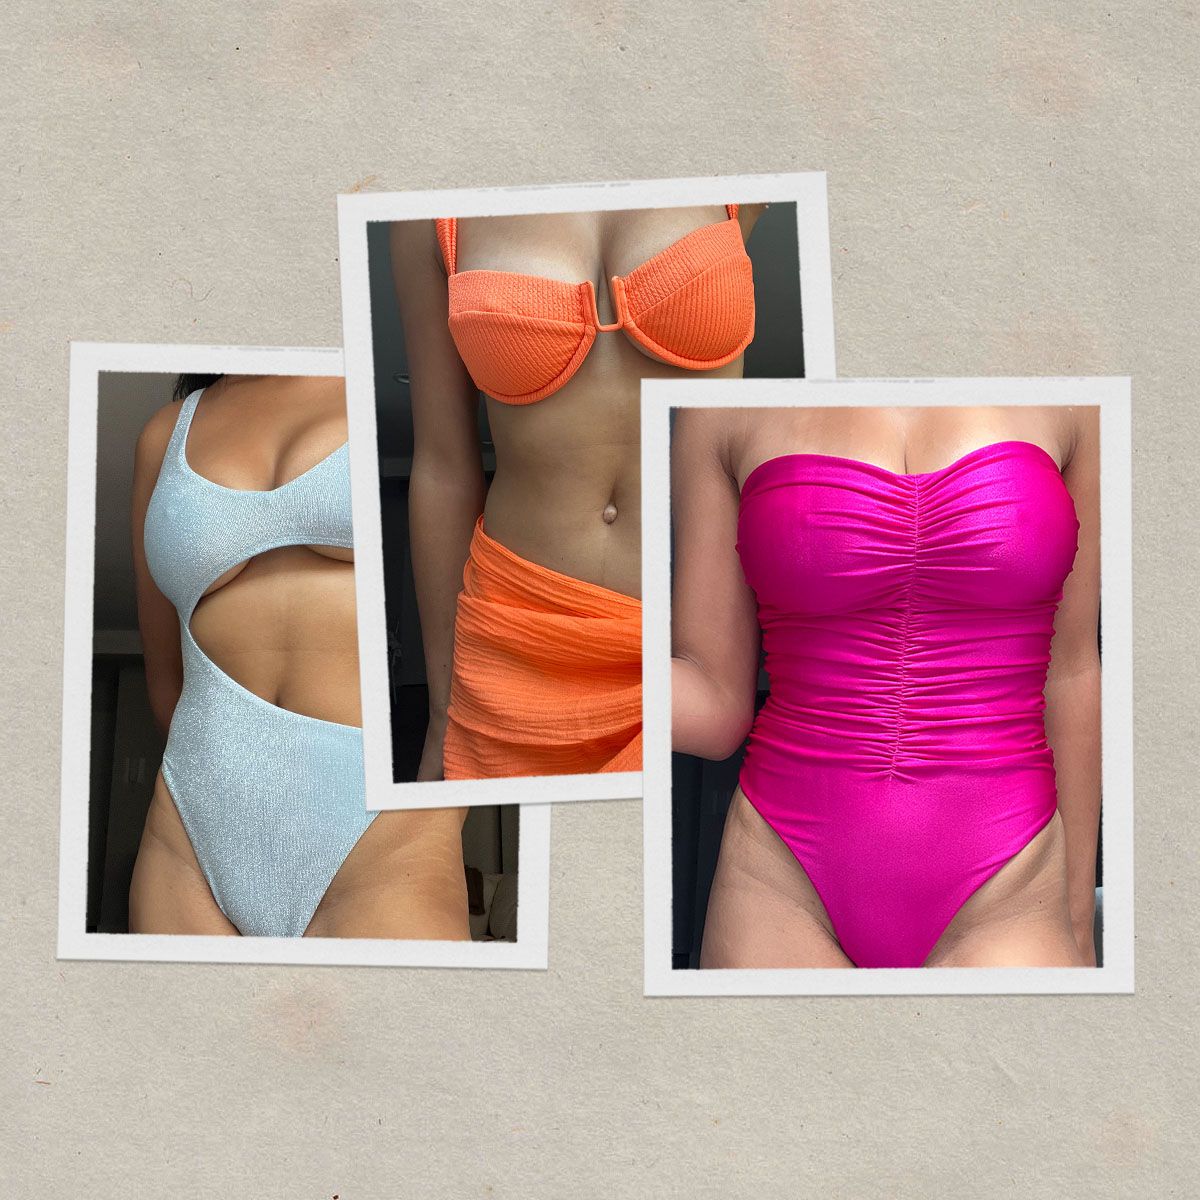 Three swimwear rules for big busts - and why you should break them